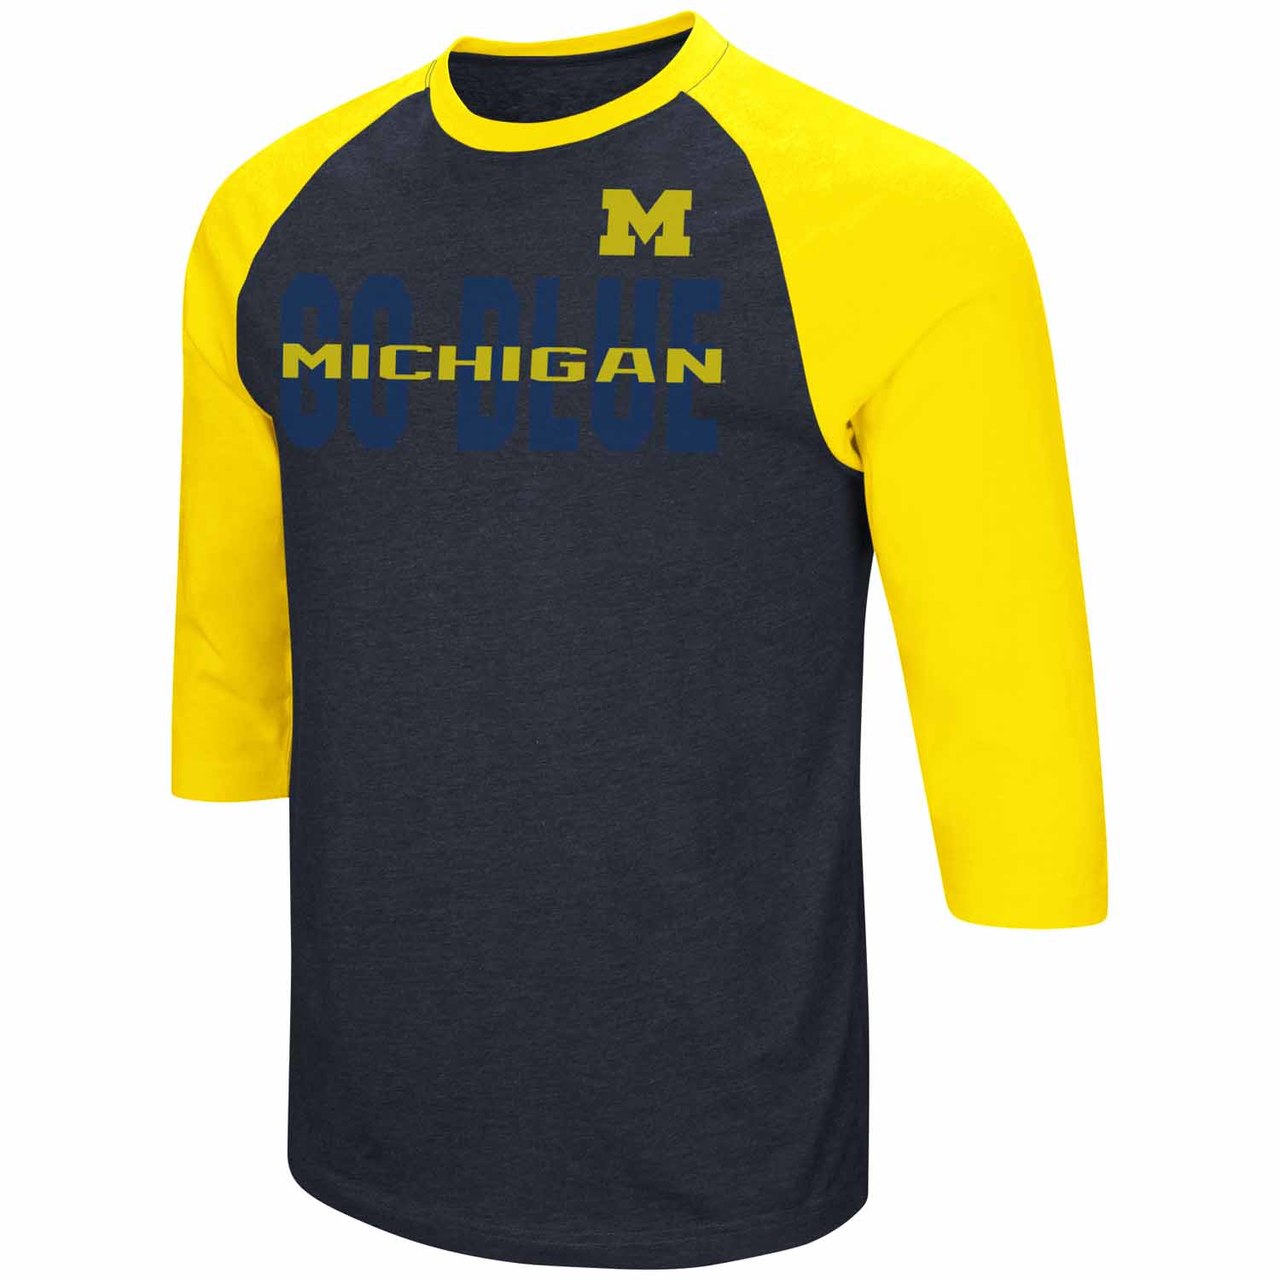 Michigan Wolverines Michigan Wolverines  Adult NCAA Steal Home 3/4 Sleeve Shirt